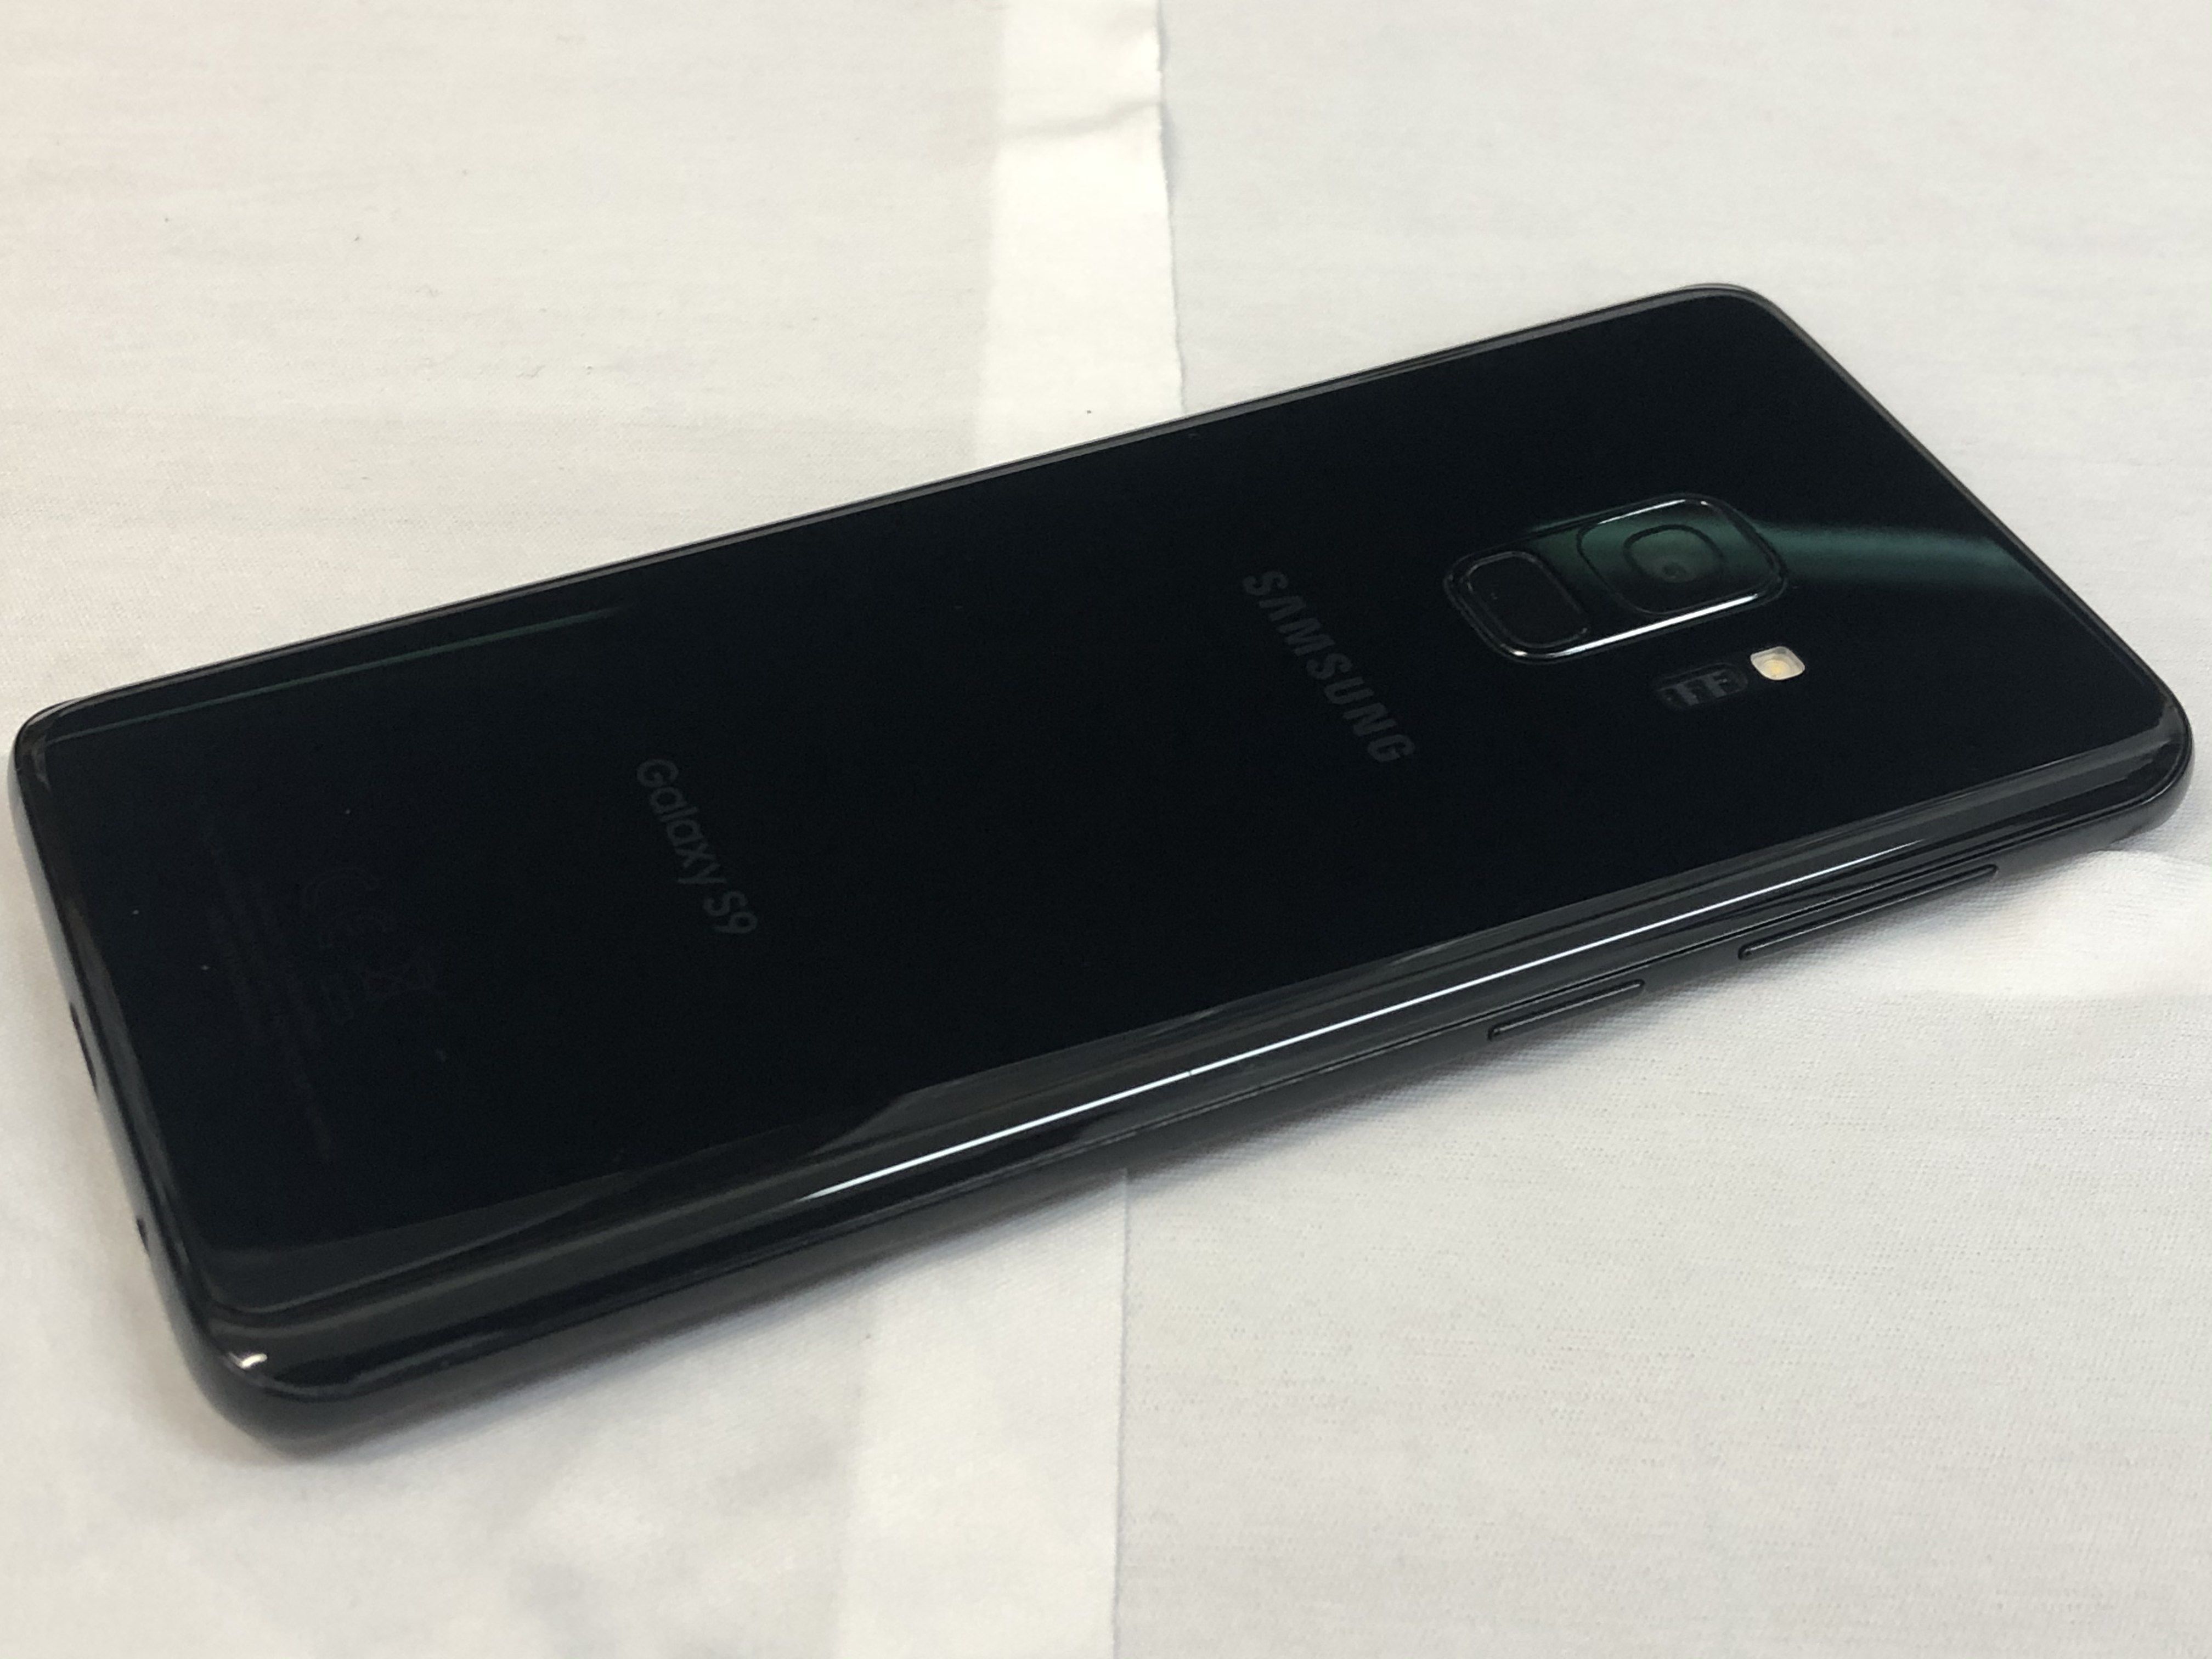 Samsung Galaxy S9 64GB || Black || *UNLOCKED* for AT&T / Cricket / T-Mobile / MetroPCS / Simple Mobile / Sprint / Verizon / others WORLWIDE